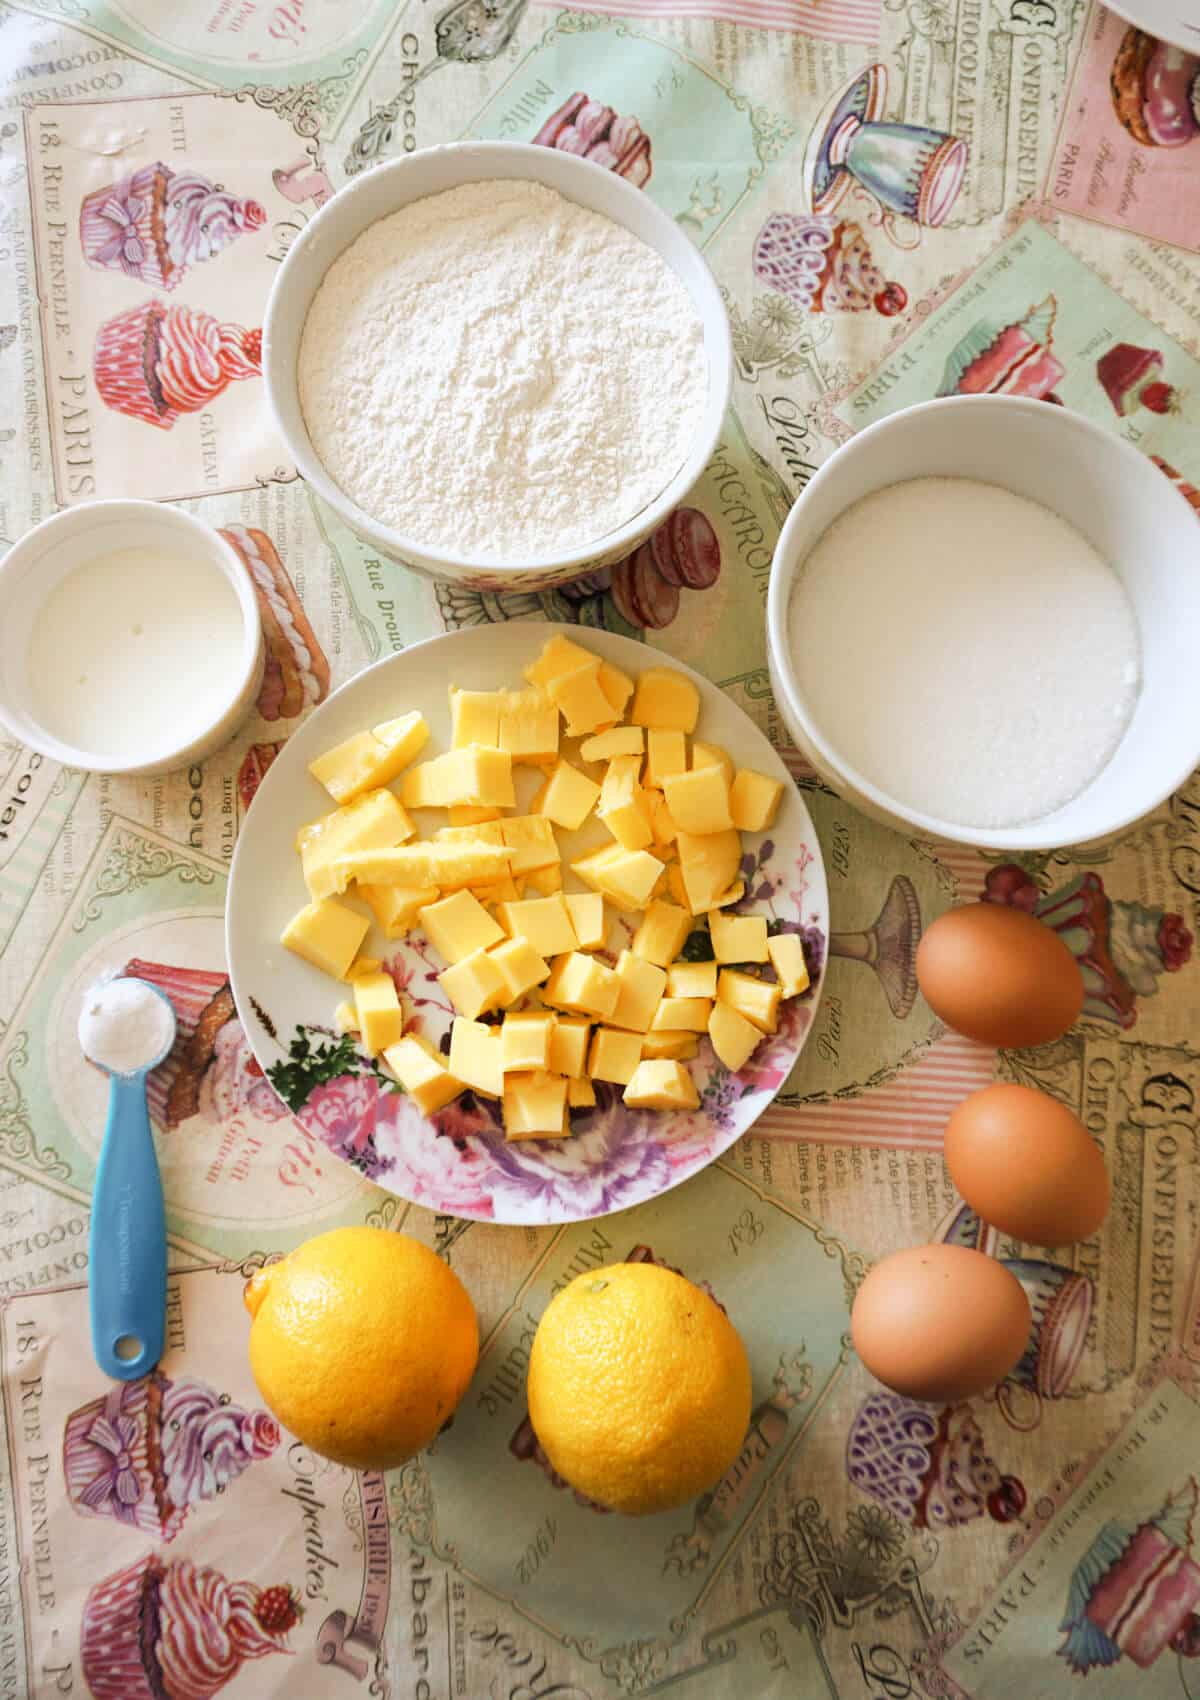 Overhead shoot of ingredients needed to make lemon drizzle cake